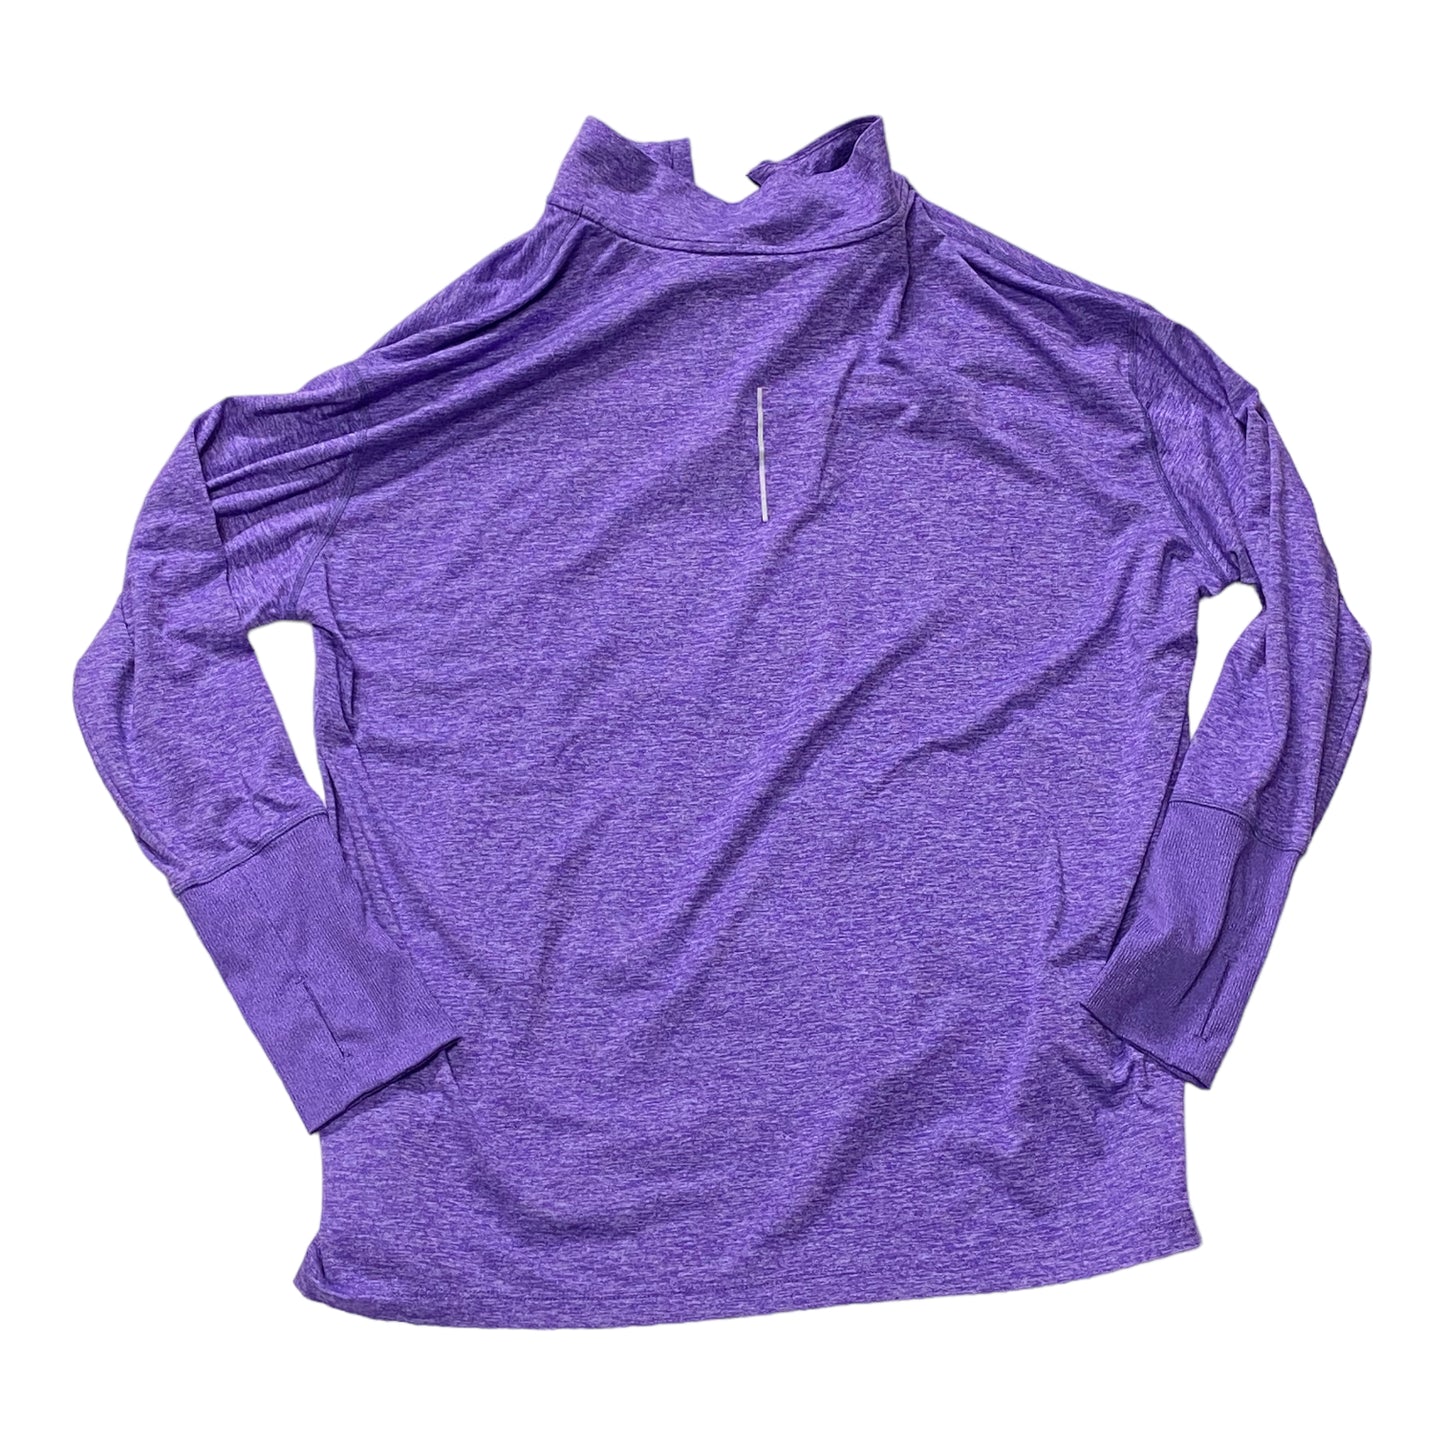 Athletic Top Long Sleeve Collar By Nike  Size: 2x